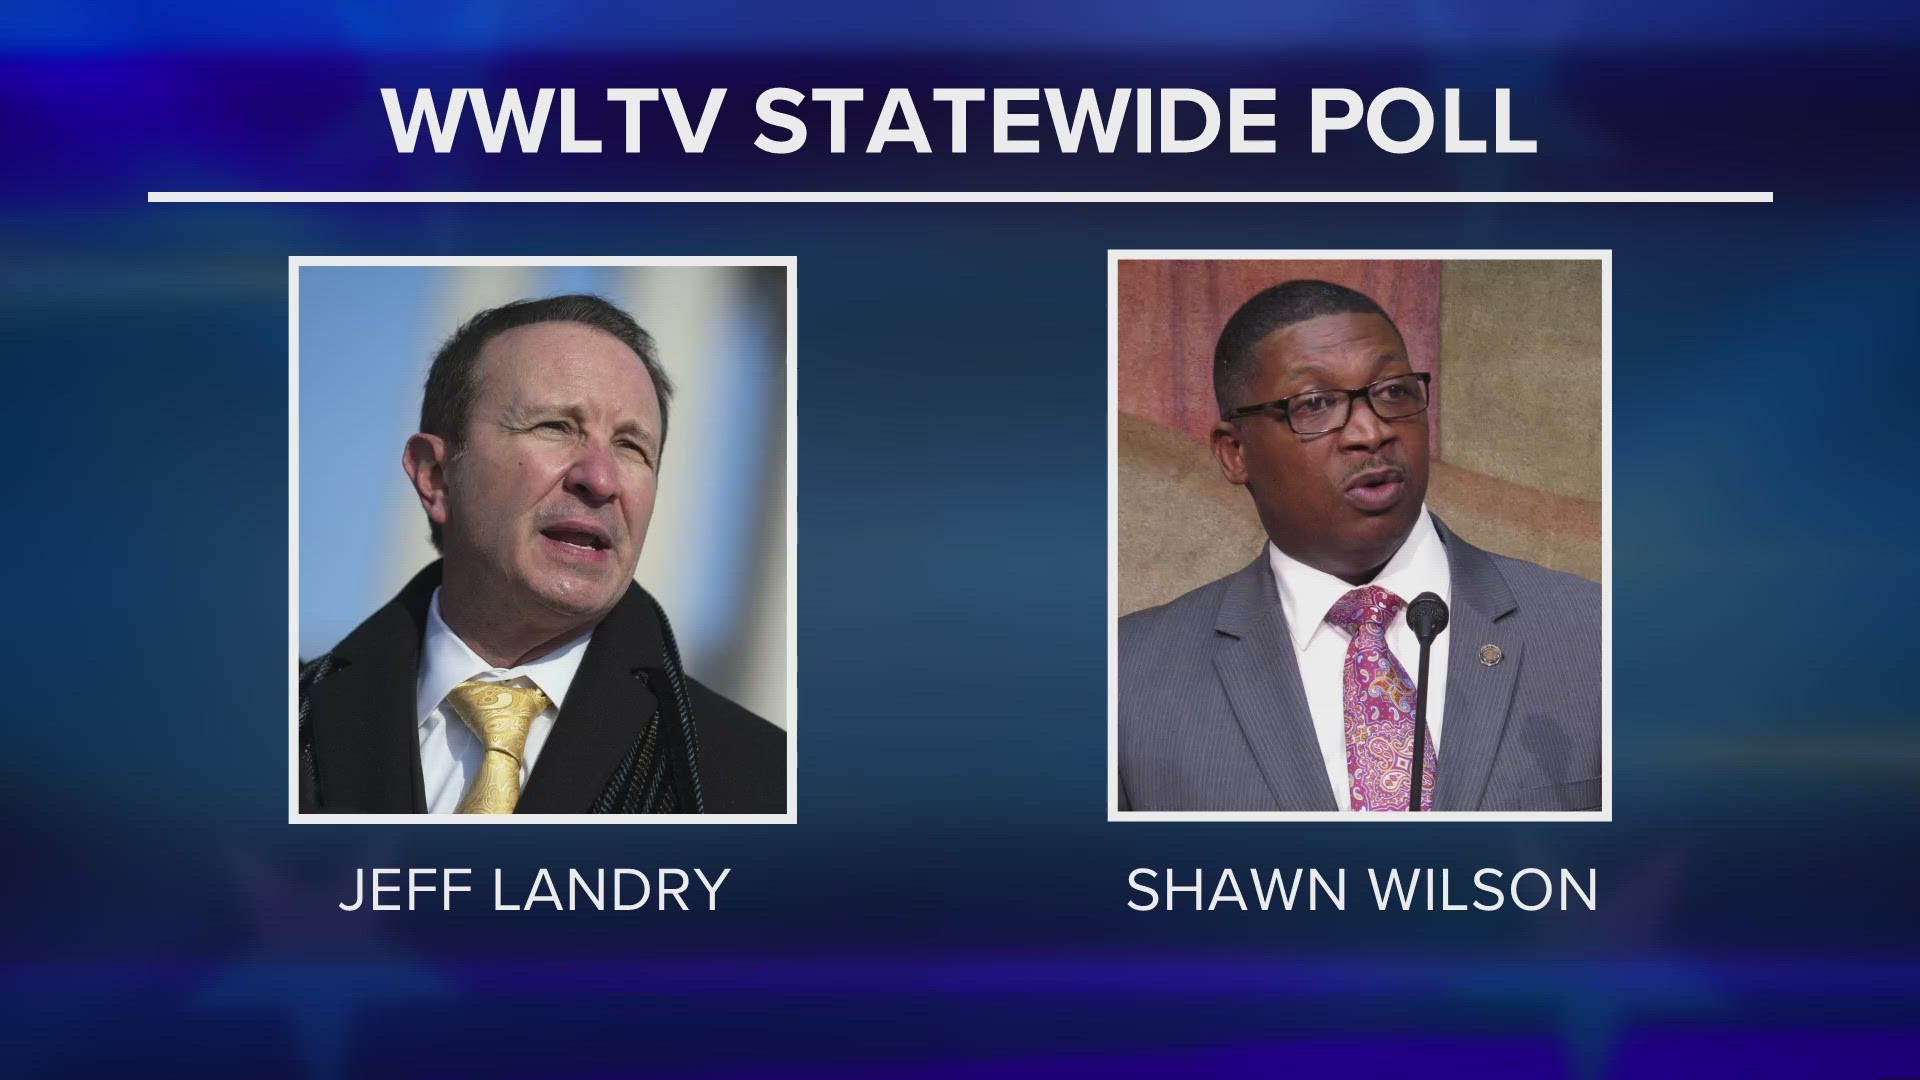 Landry, the state's current Attorney General, took the lead with 36% across all demographic voters.